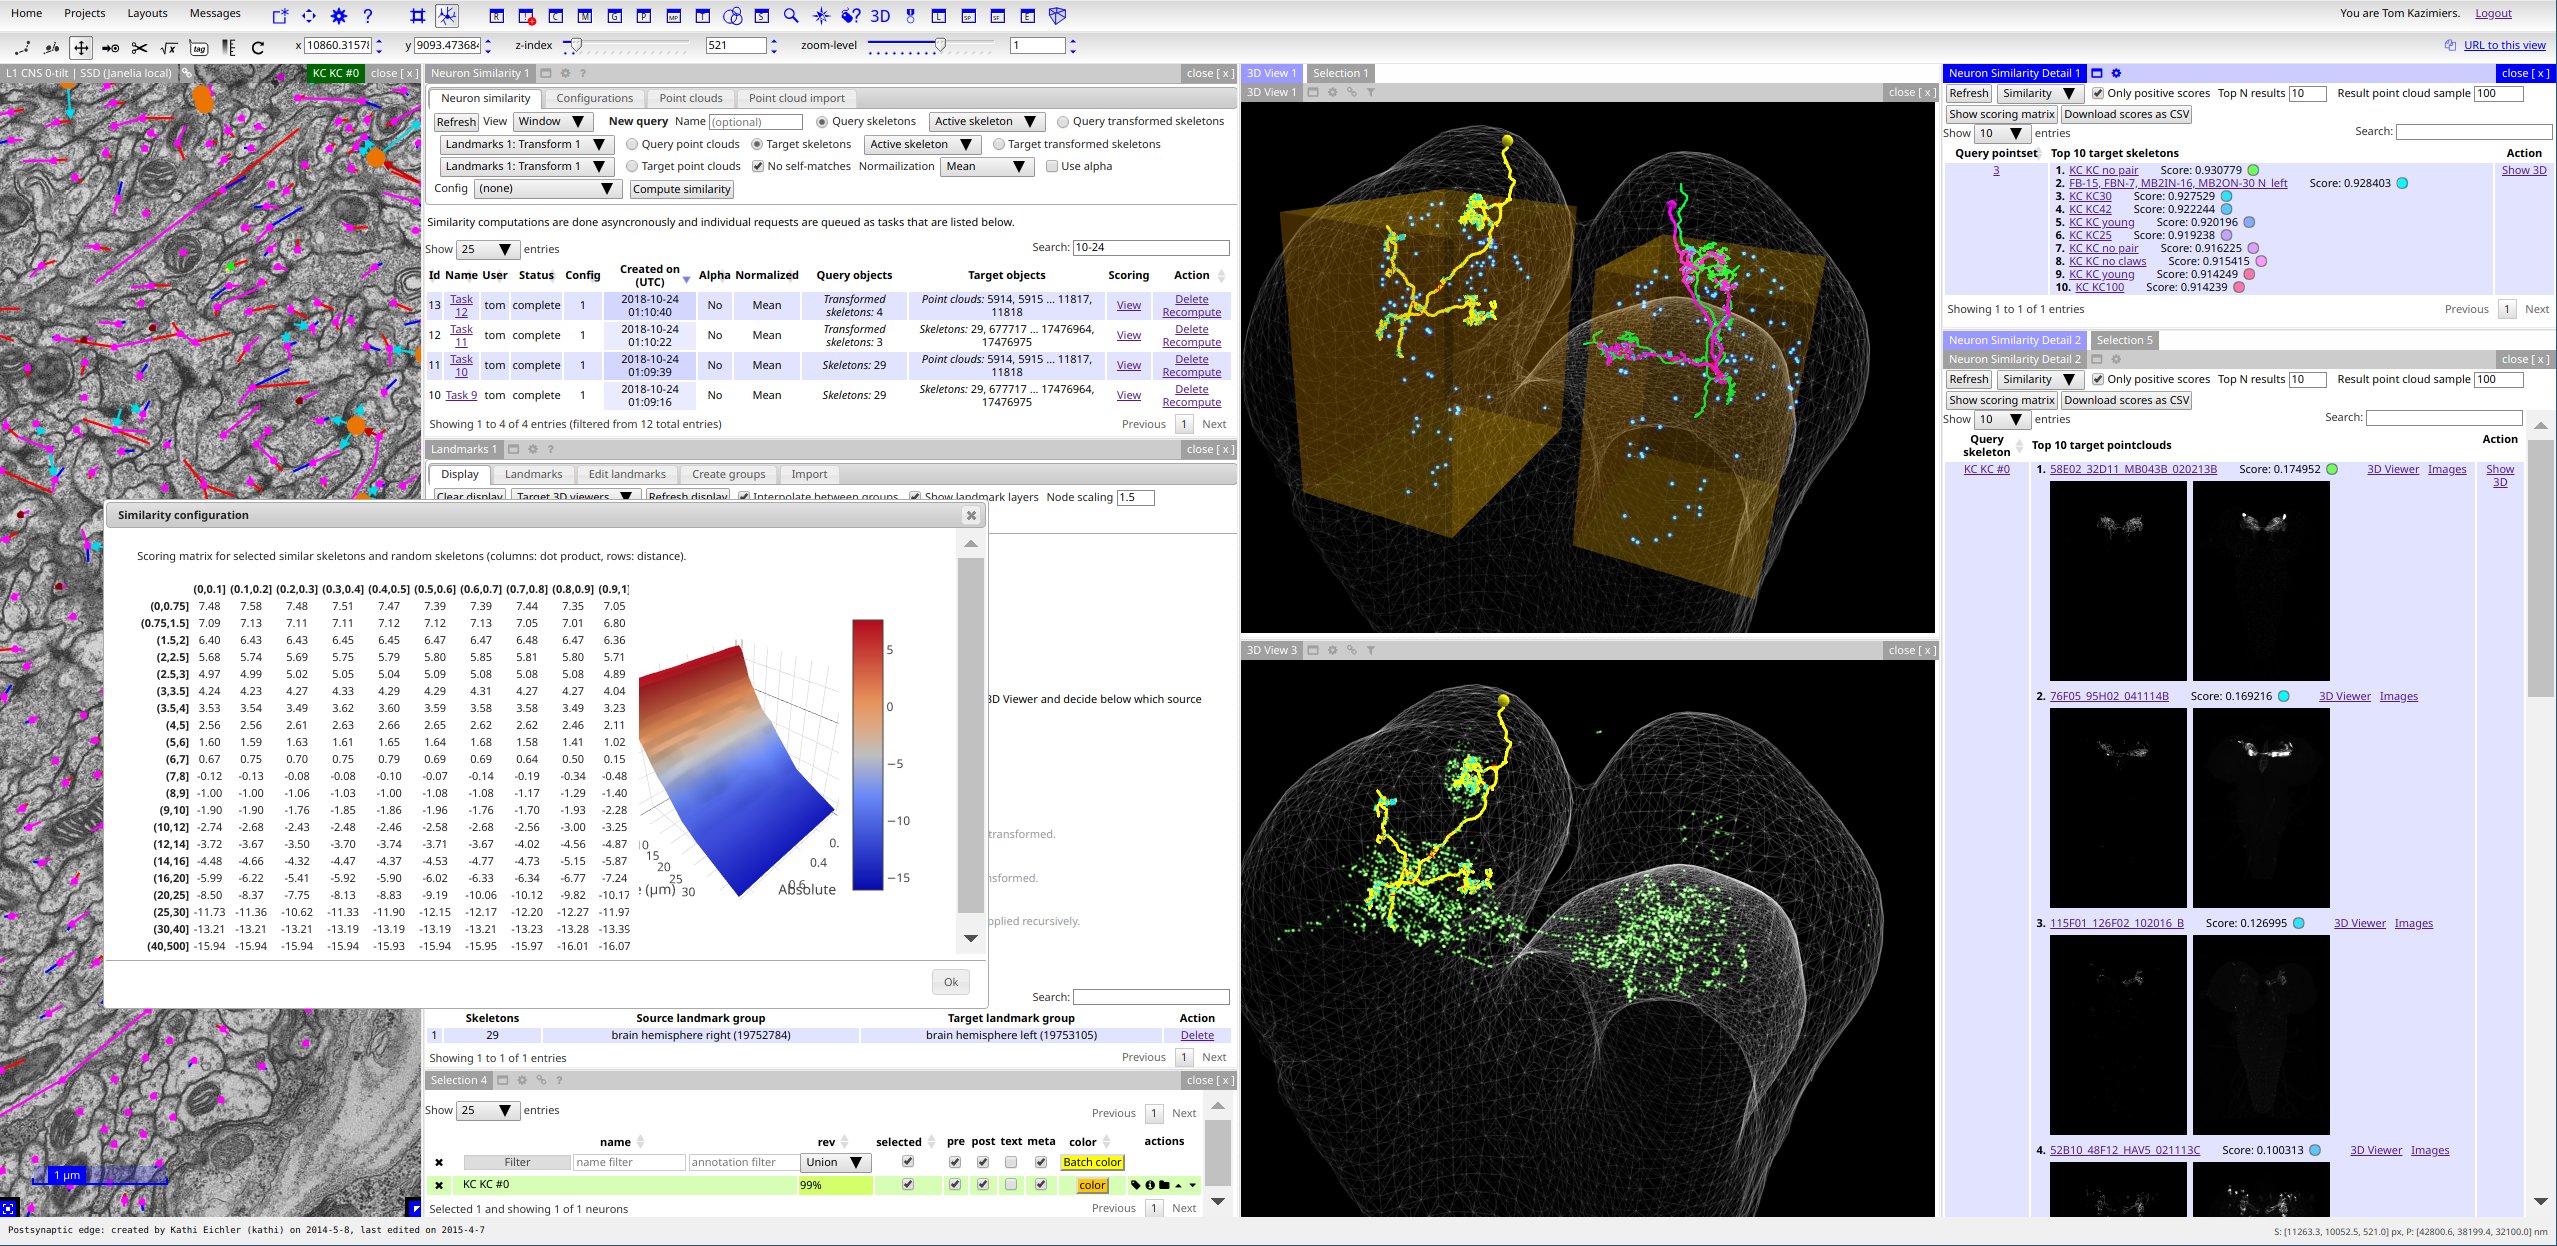 Image of CATMAID's neuron tracing environment and NBLAST similarity analysis in the L1 Drosophila dataset